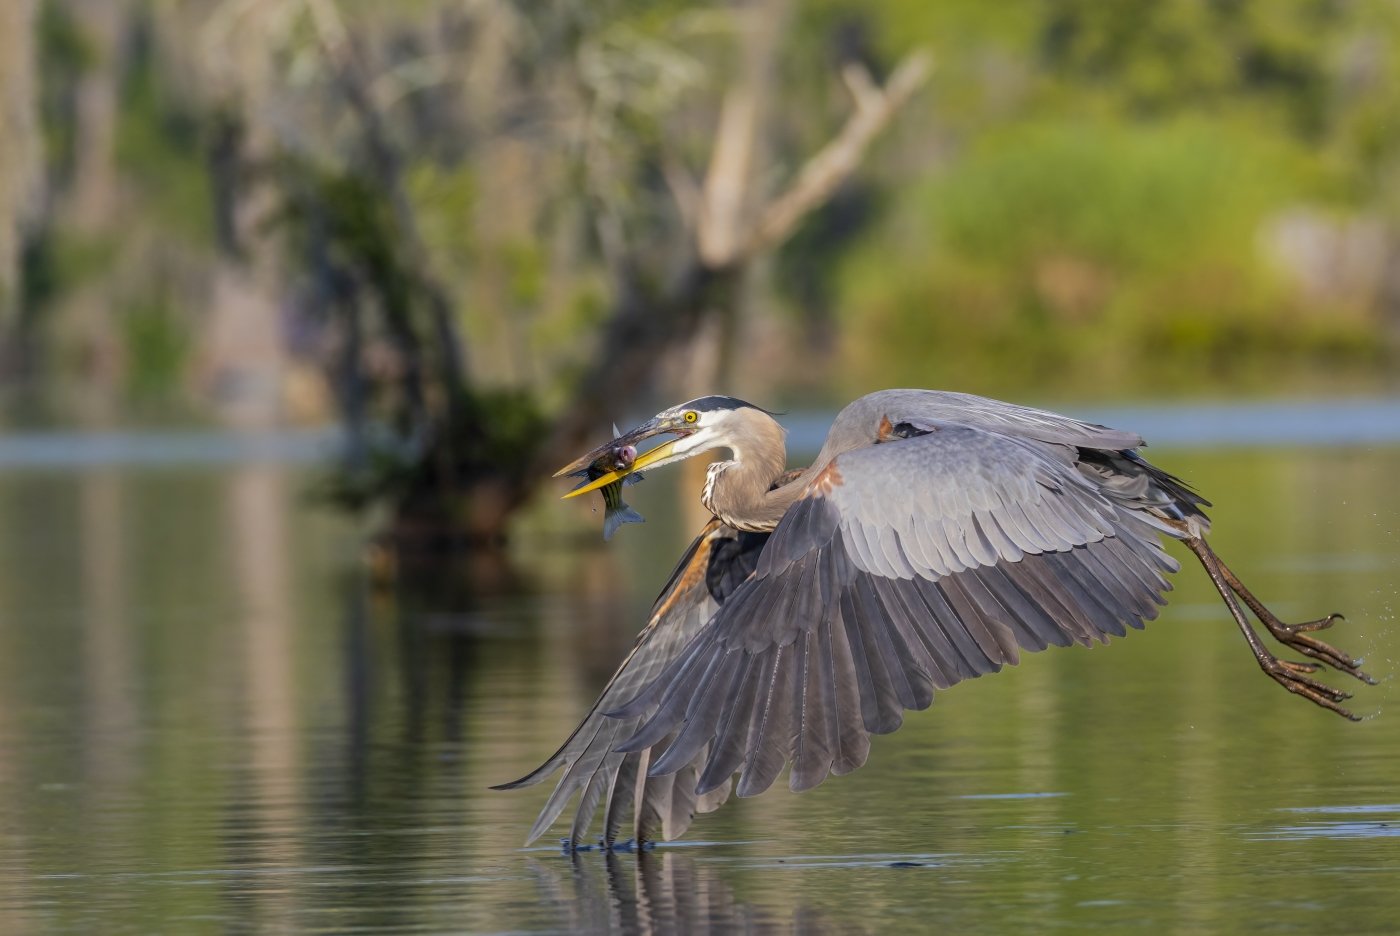 A Gentle Touch Great Blue Heron, Barry Broussard, Lafayette Photographic Society, 2nd Place